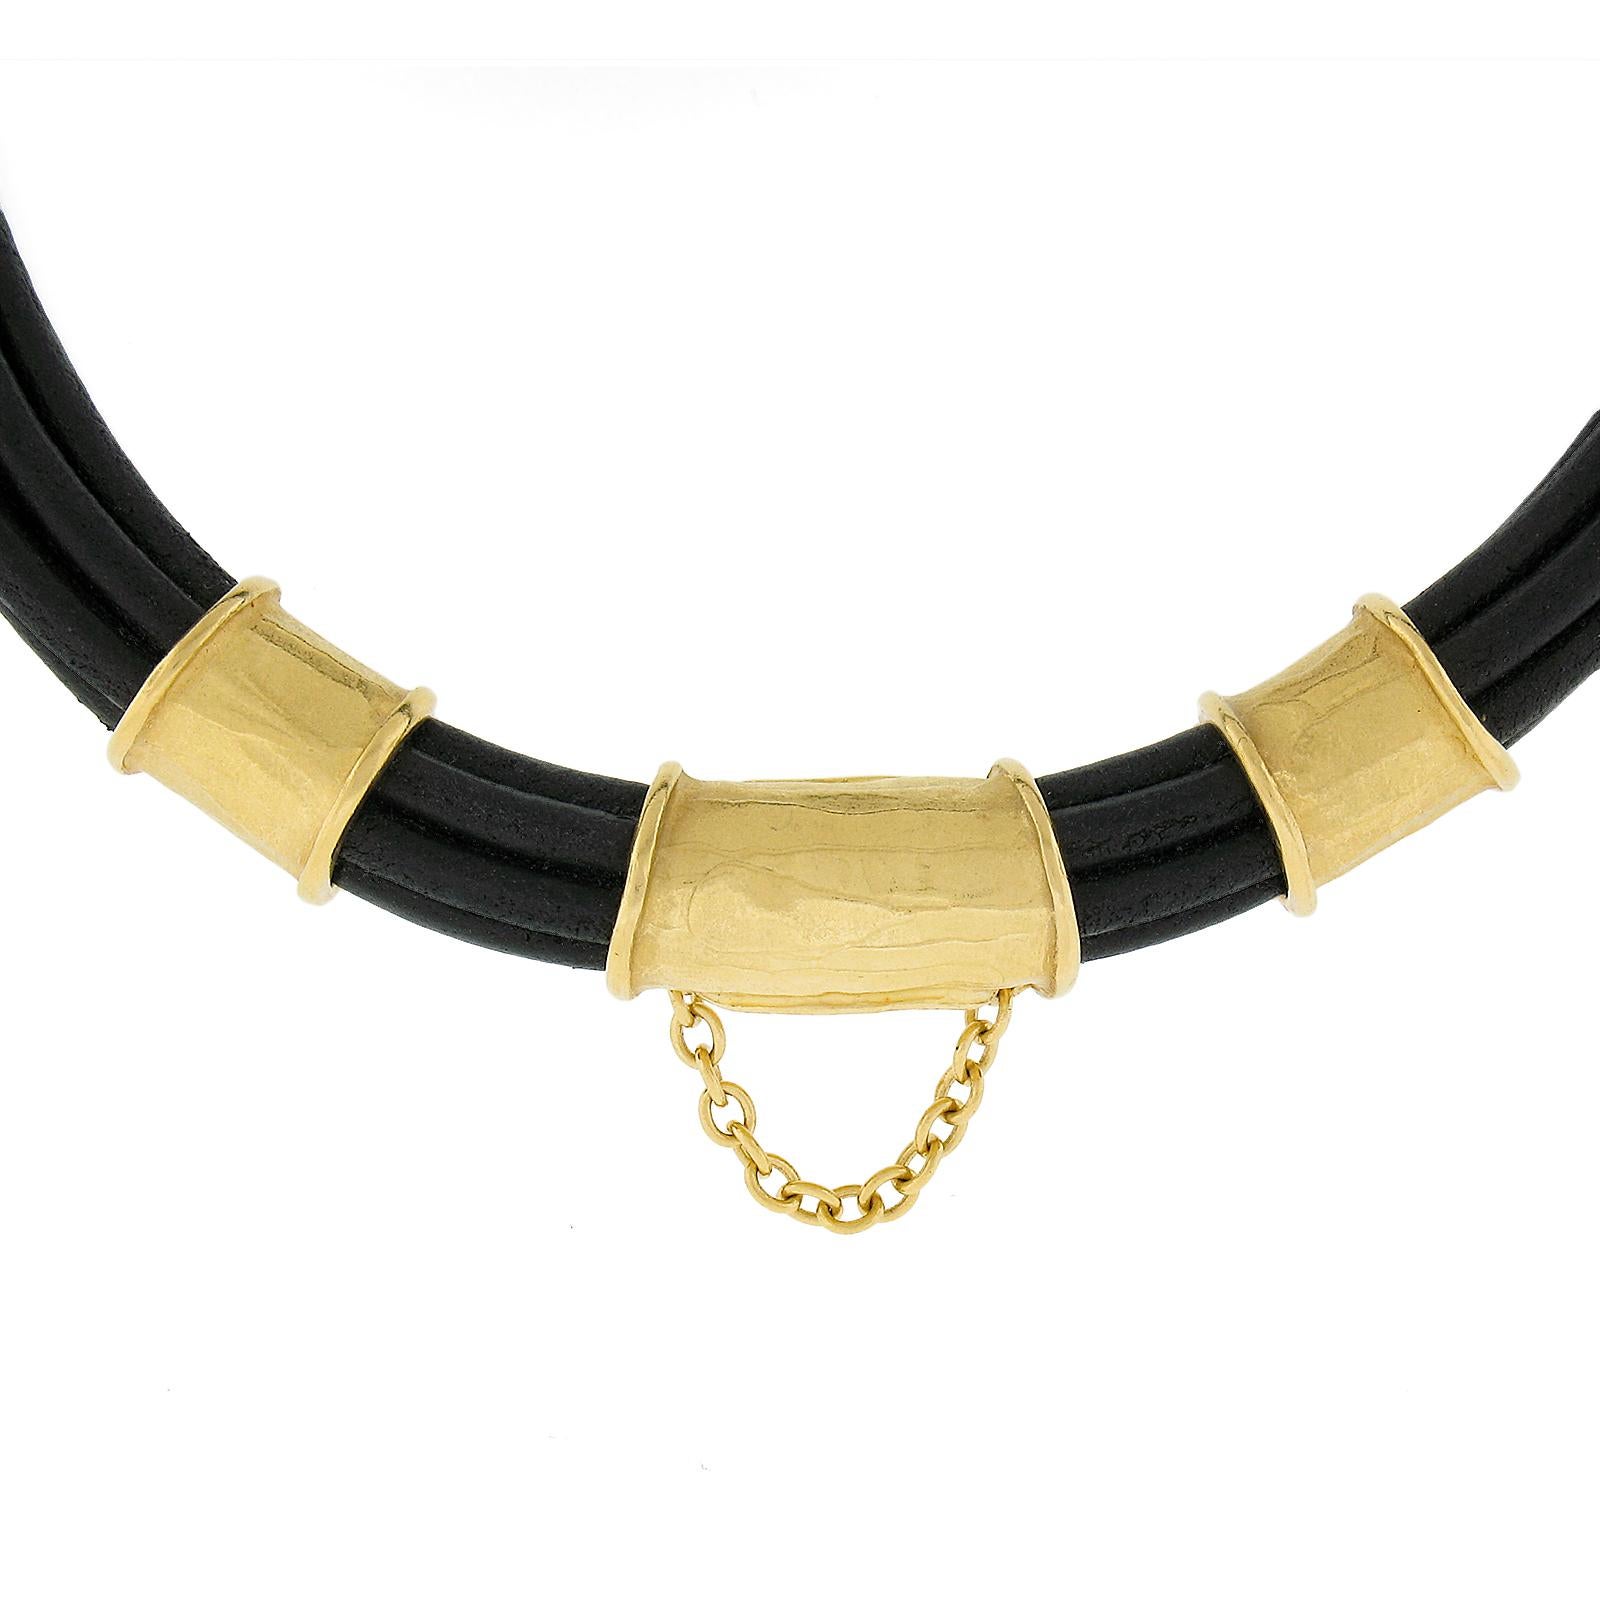 Women's or Men's Denise Roberge 22k Gold Black Leather Cord Choker Necklace w/ Slide Charms